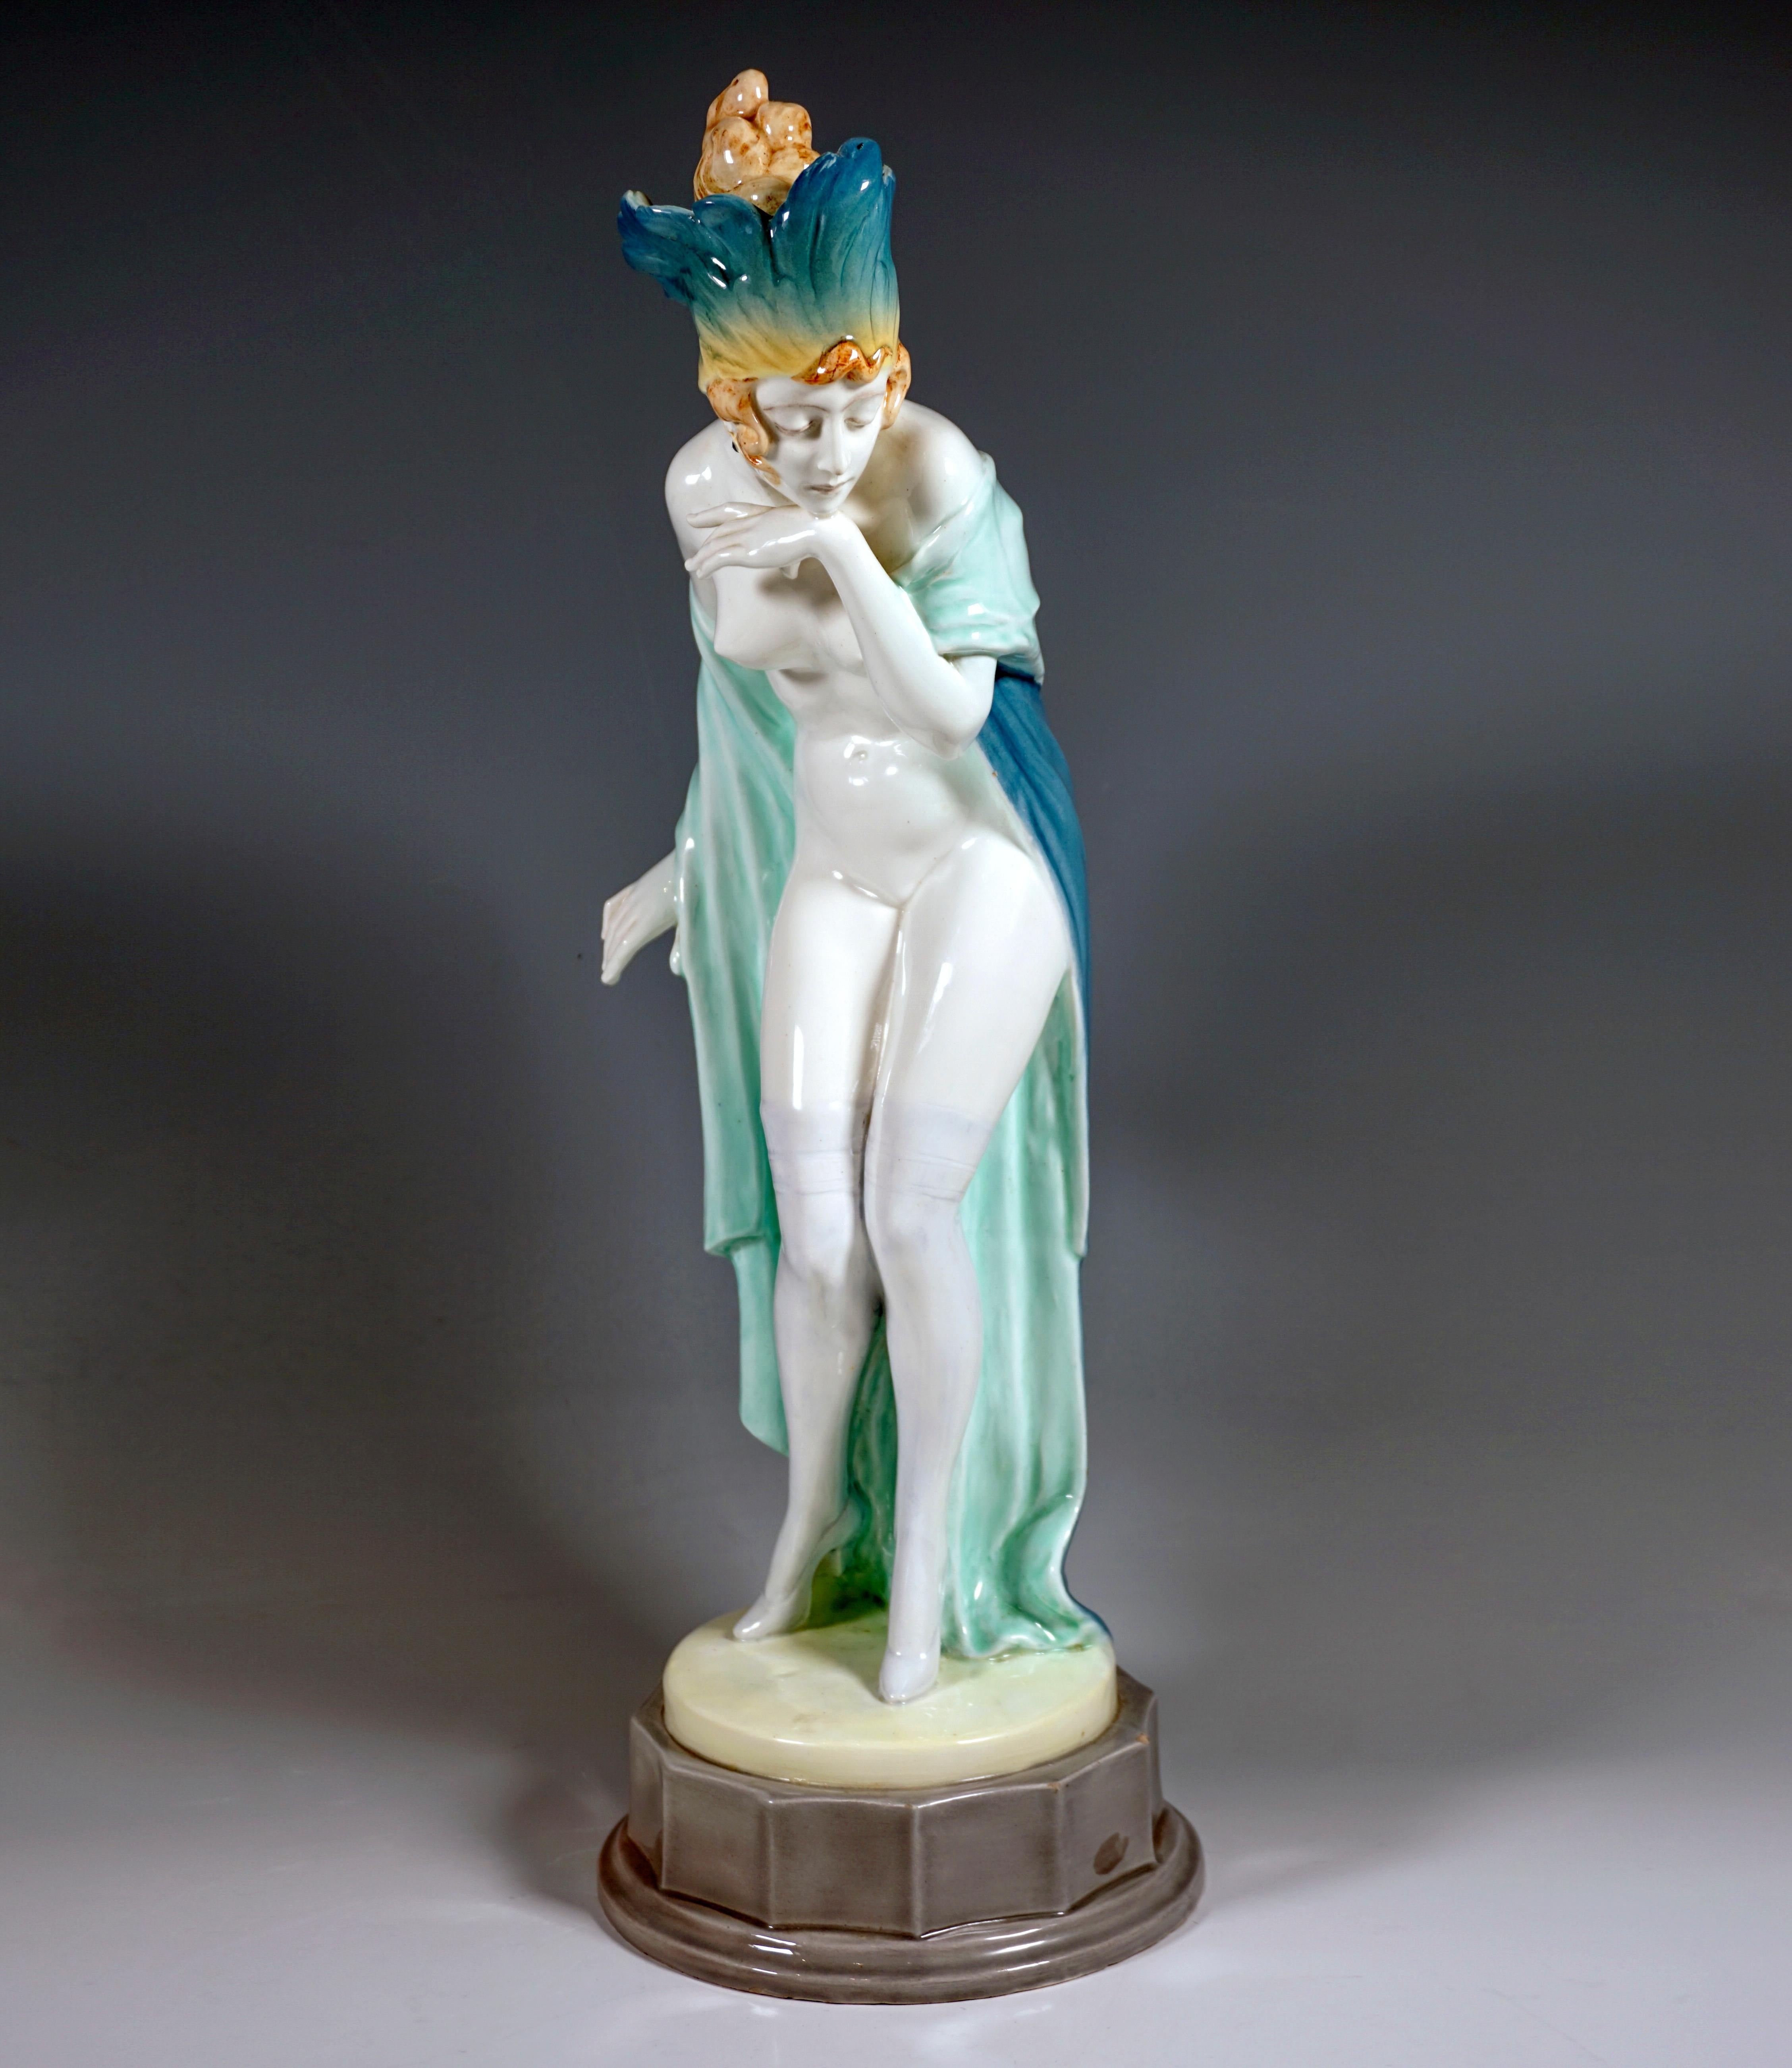 Impressive goldscheider Vienna ceramic figurine of the 1920s:
The young lady with artistically pinned up hair wears only transparent overknee stockings and high heels, as well as a headdress densely decorated with shaded turquoise-yellow feathers,